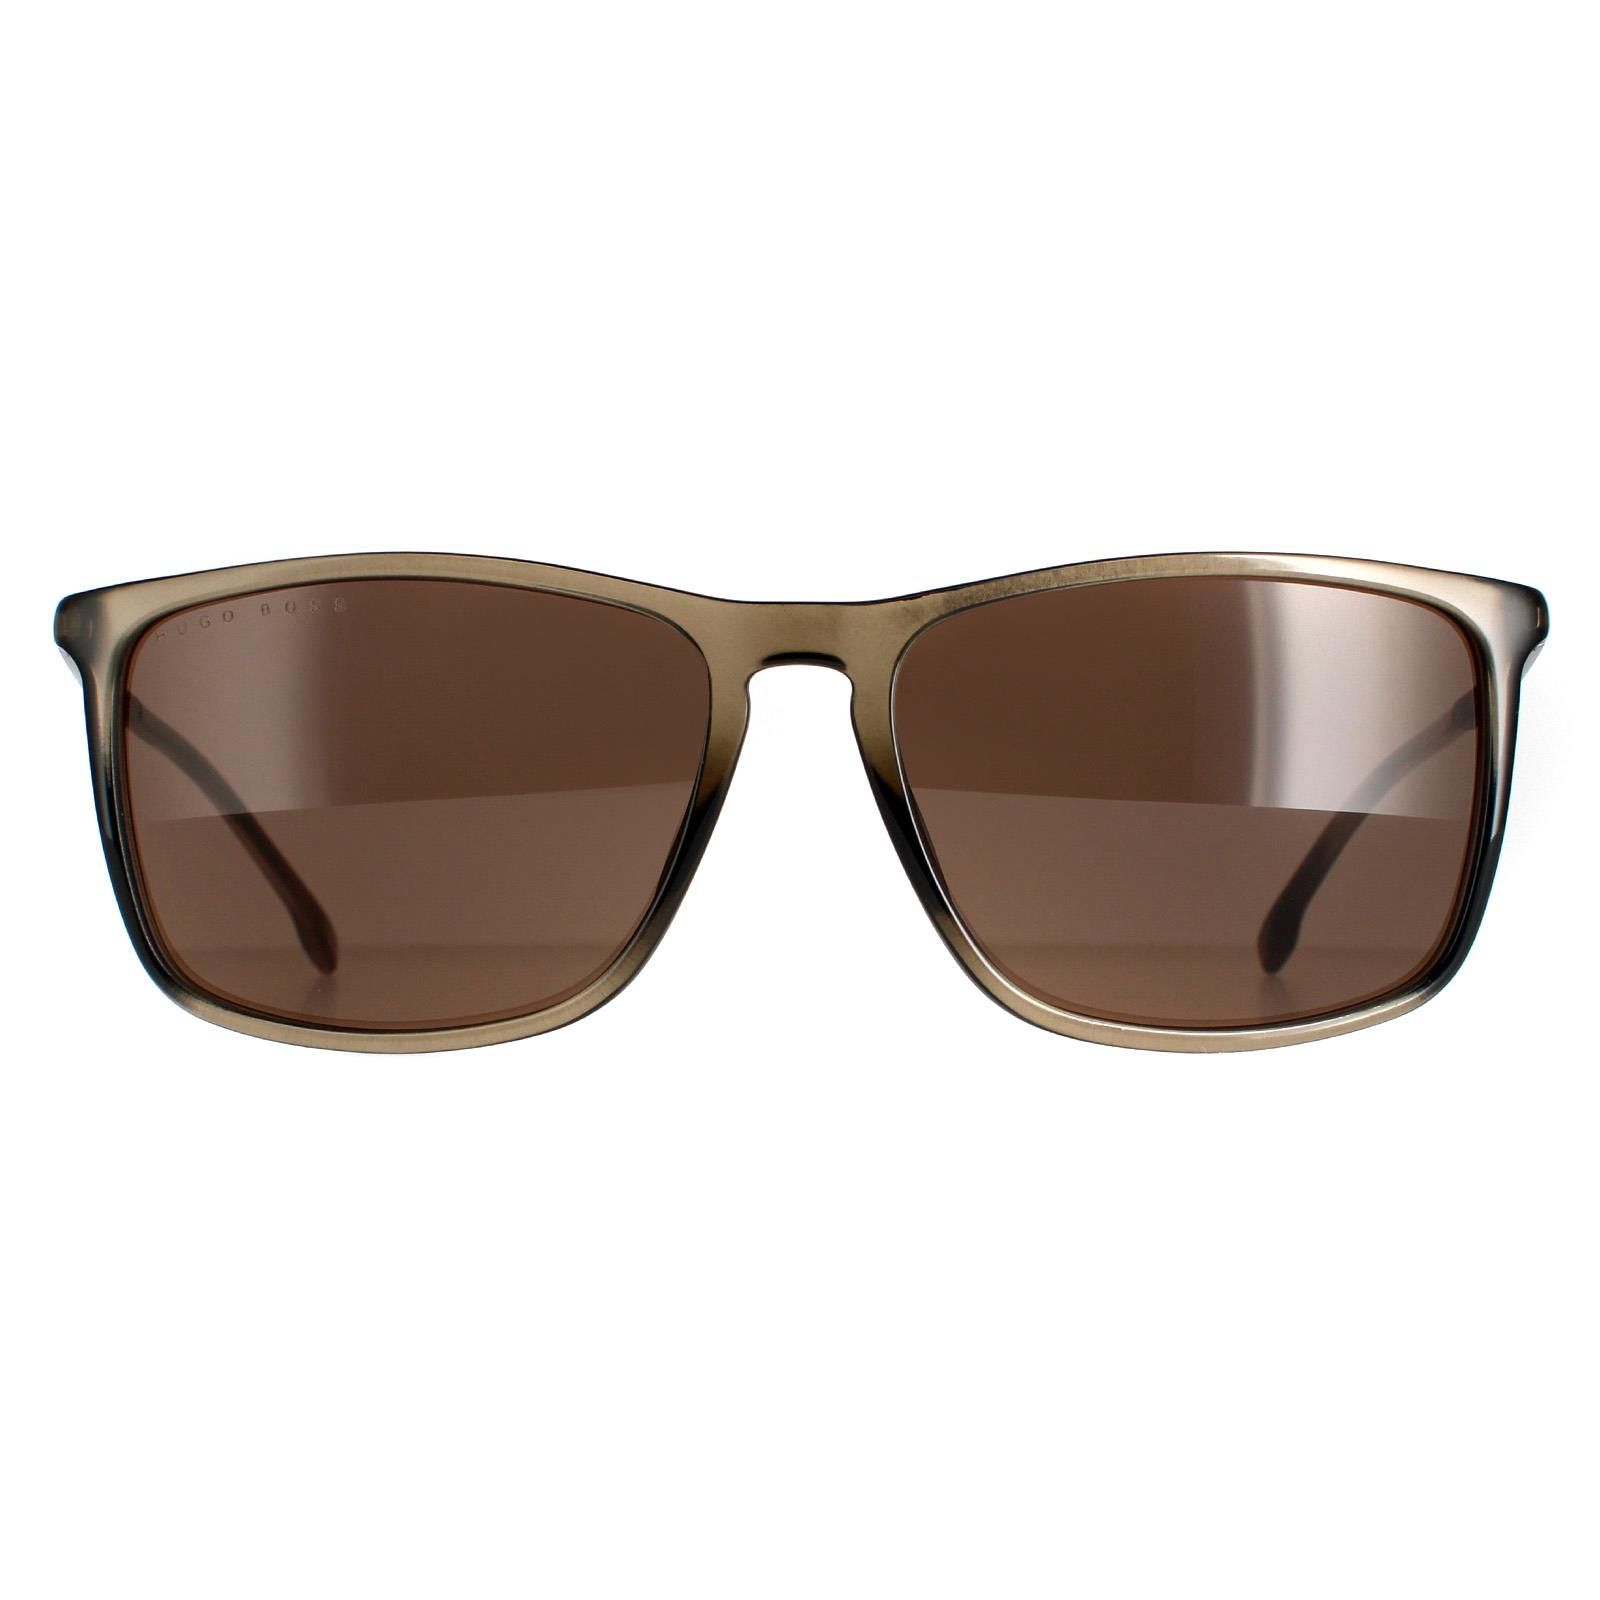 Hugo Boss Rectangle Mens Brown Brown BOSS 1182/S/IT  Hugo Boss are a masculine design with a super slim rectangular frame. Crafted in Italy from lightweight plastic they're comfortable and durable with the Hugo Boss logo etched into the slender temples.